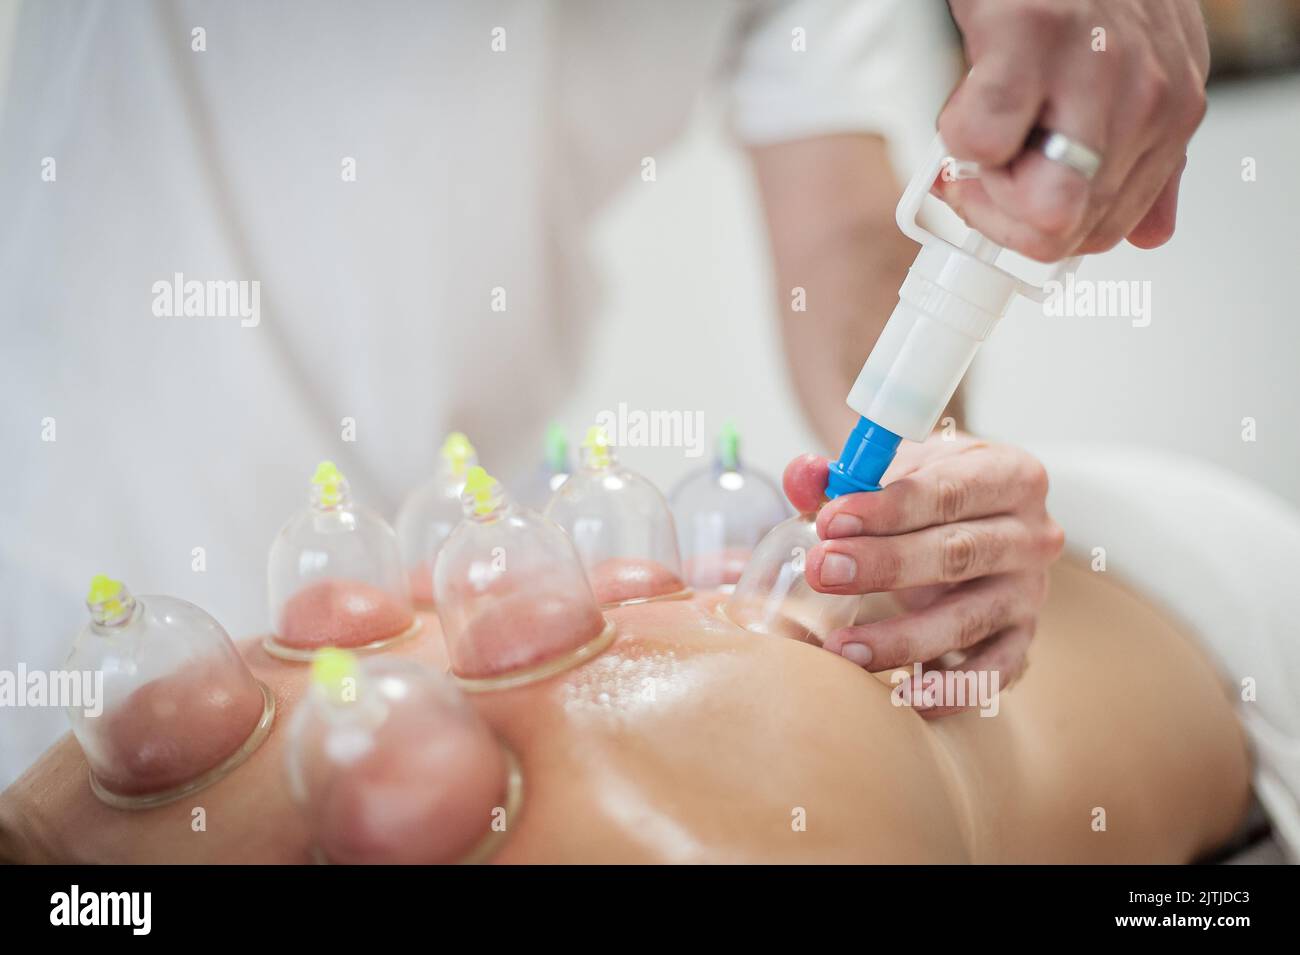 Glass multiple vacuum cup for medical cupping therapy on women's back. Ventosa traditional massage. Alternative Medicine. Medical health care Stock Photo